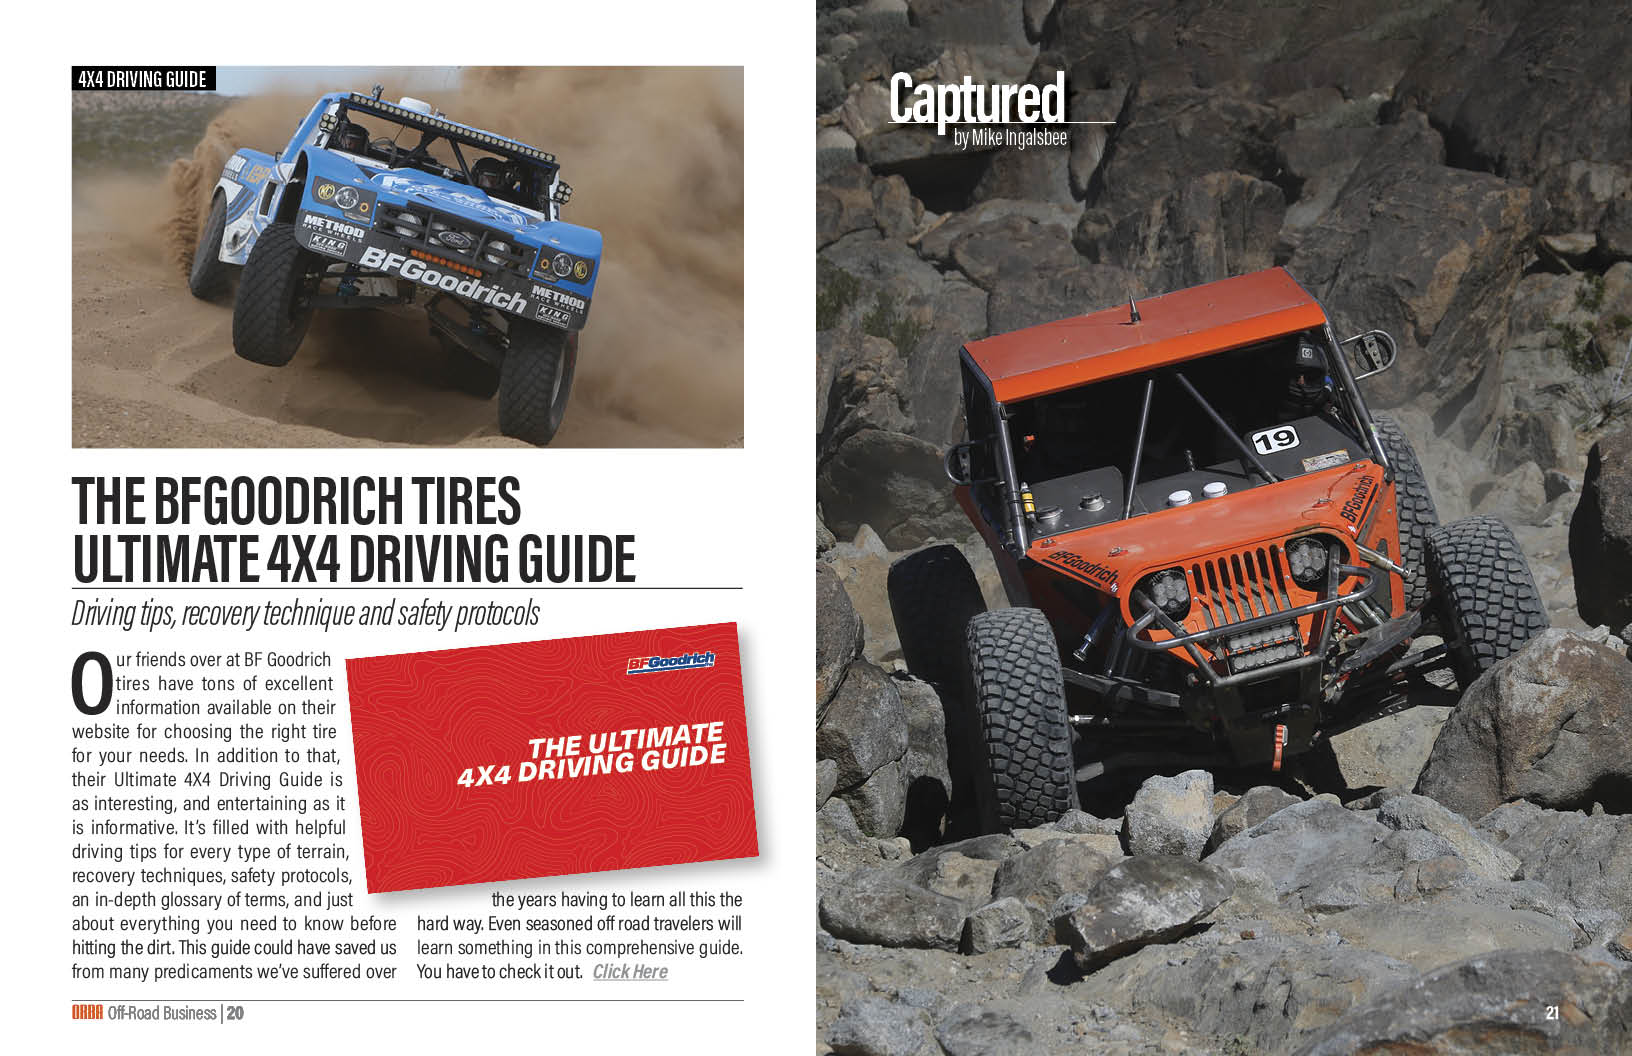 The BFGoodrich Tires Ultimate 4X4 Driving Guide